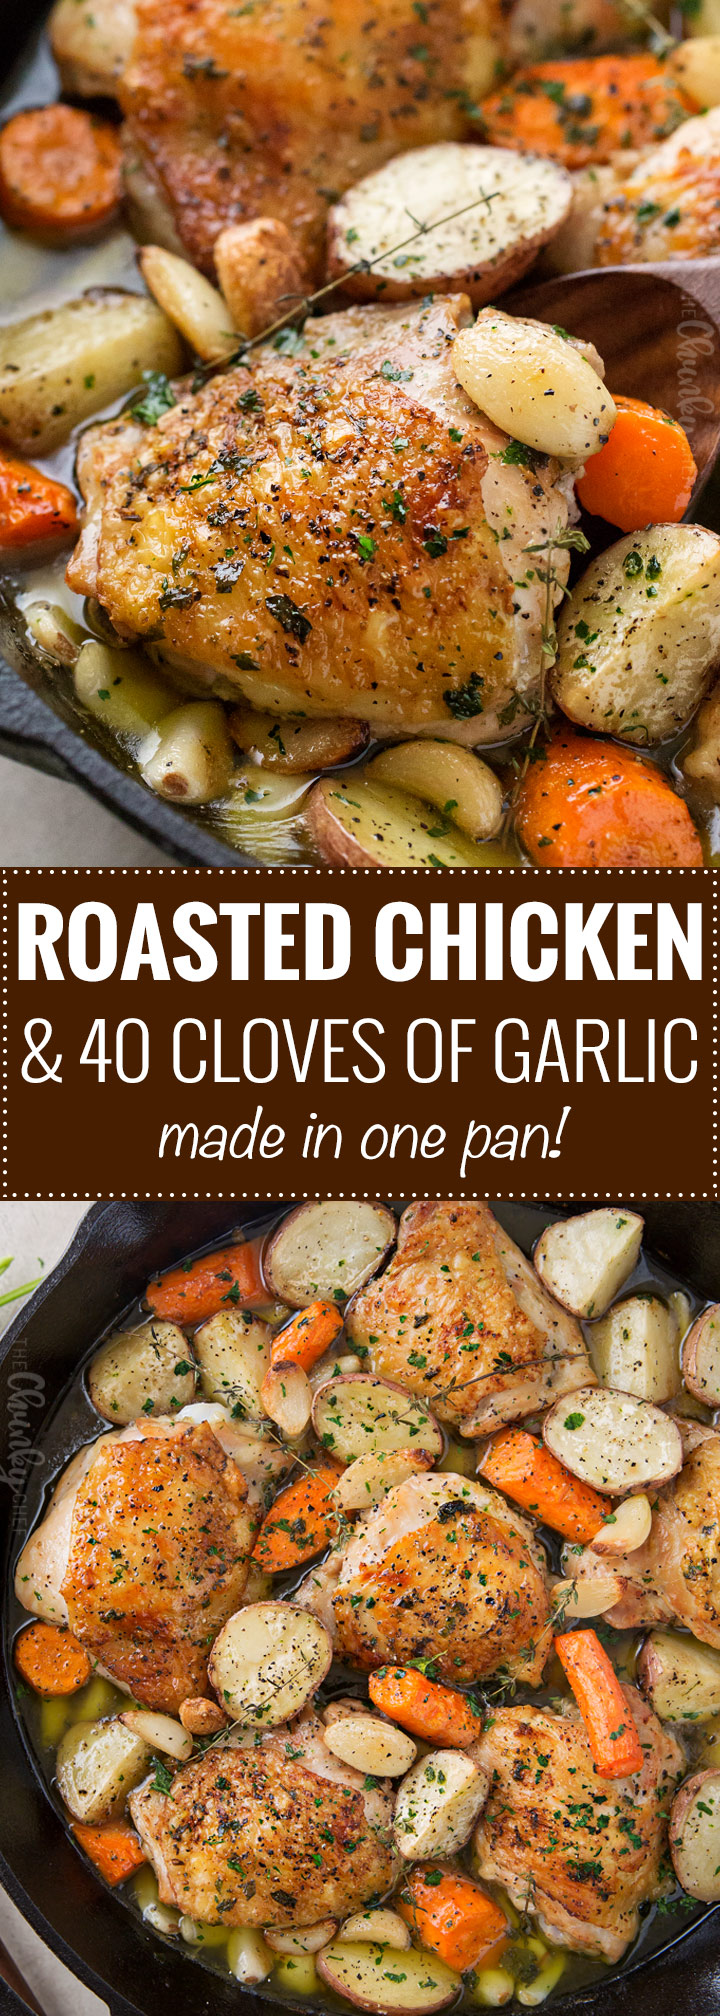 One Pan Roasted Chicken and 40 Cloves of Garlic | Chicken thighs are roasted with garlic, herbs, white wine, potatoes and carrots for an incredibly flavorful one pan meal! | The Chunky Chef | #dinnerrecipe #chicken #roasted #onepan #onepot #easyrecipe